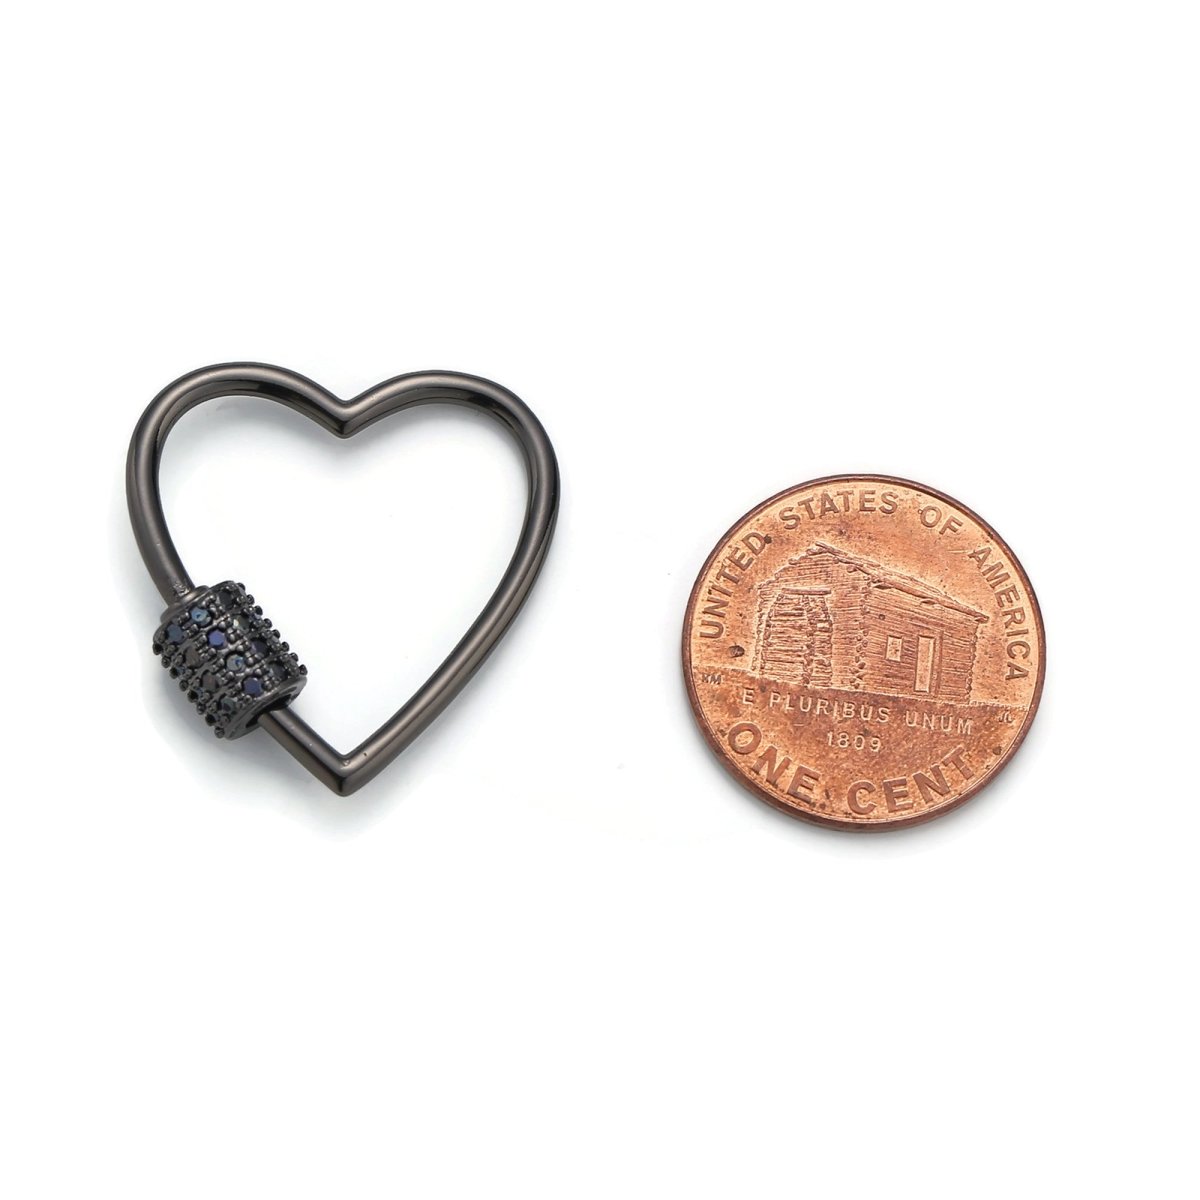 24K Gold-Plated Heart Carabiner, Circle Screw Clasp with Rhinestones, Gold, Rose Gold, and Black Color Options - DLUXCA